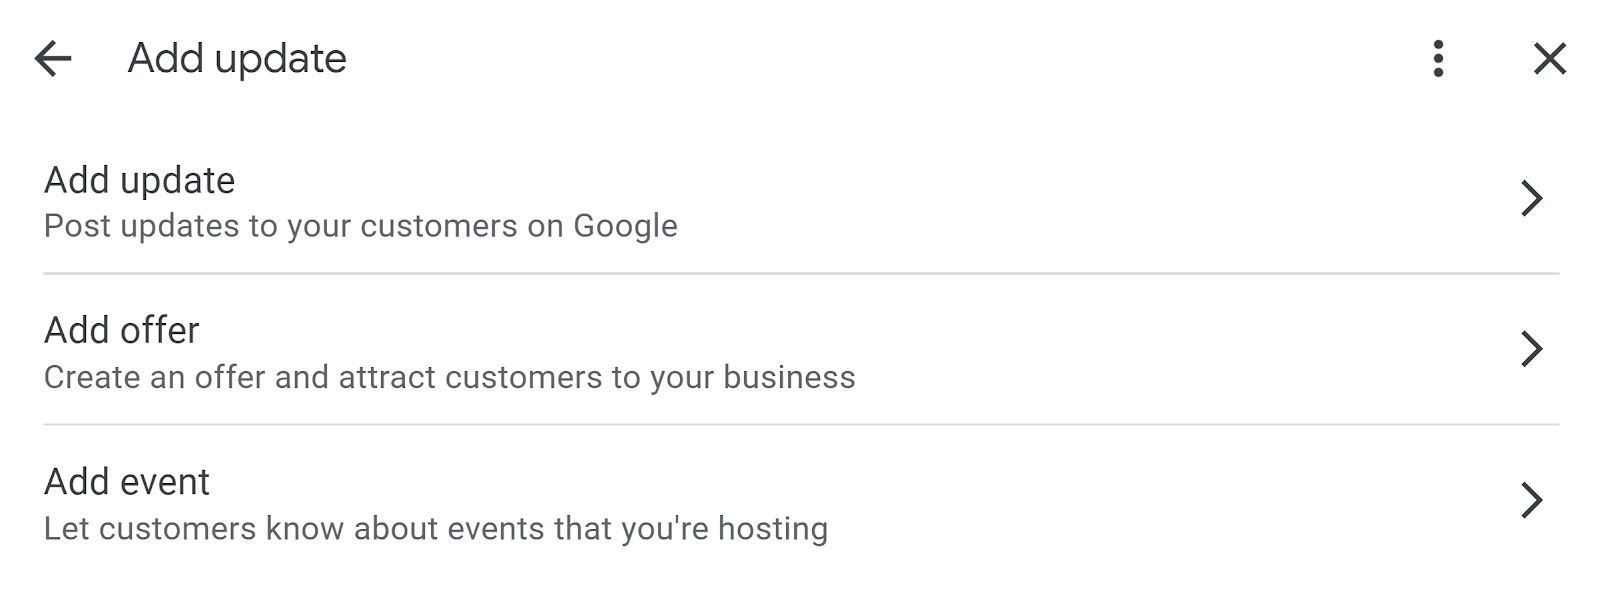 "Add update" section of Google Business Profile.